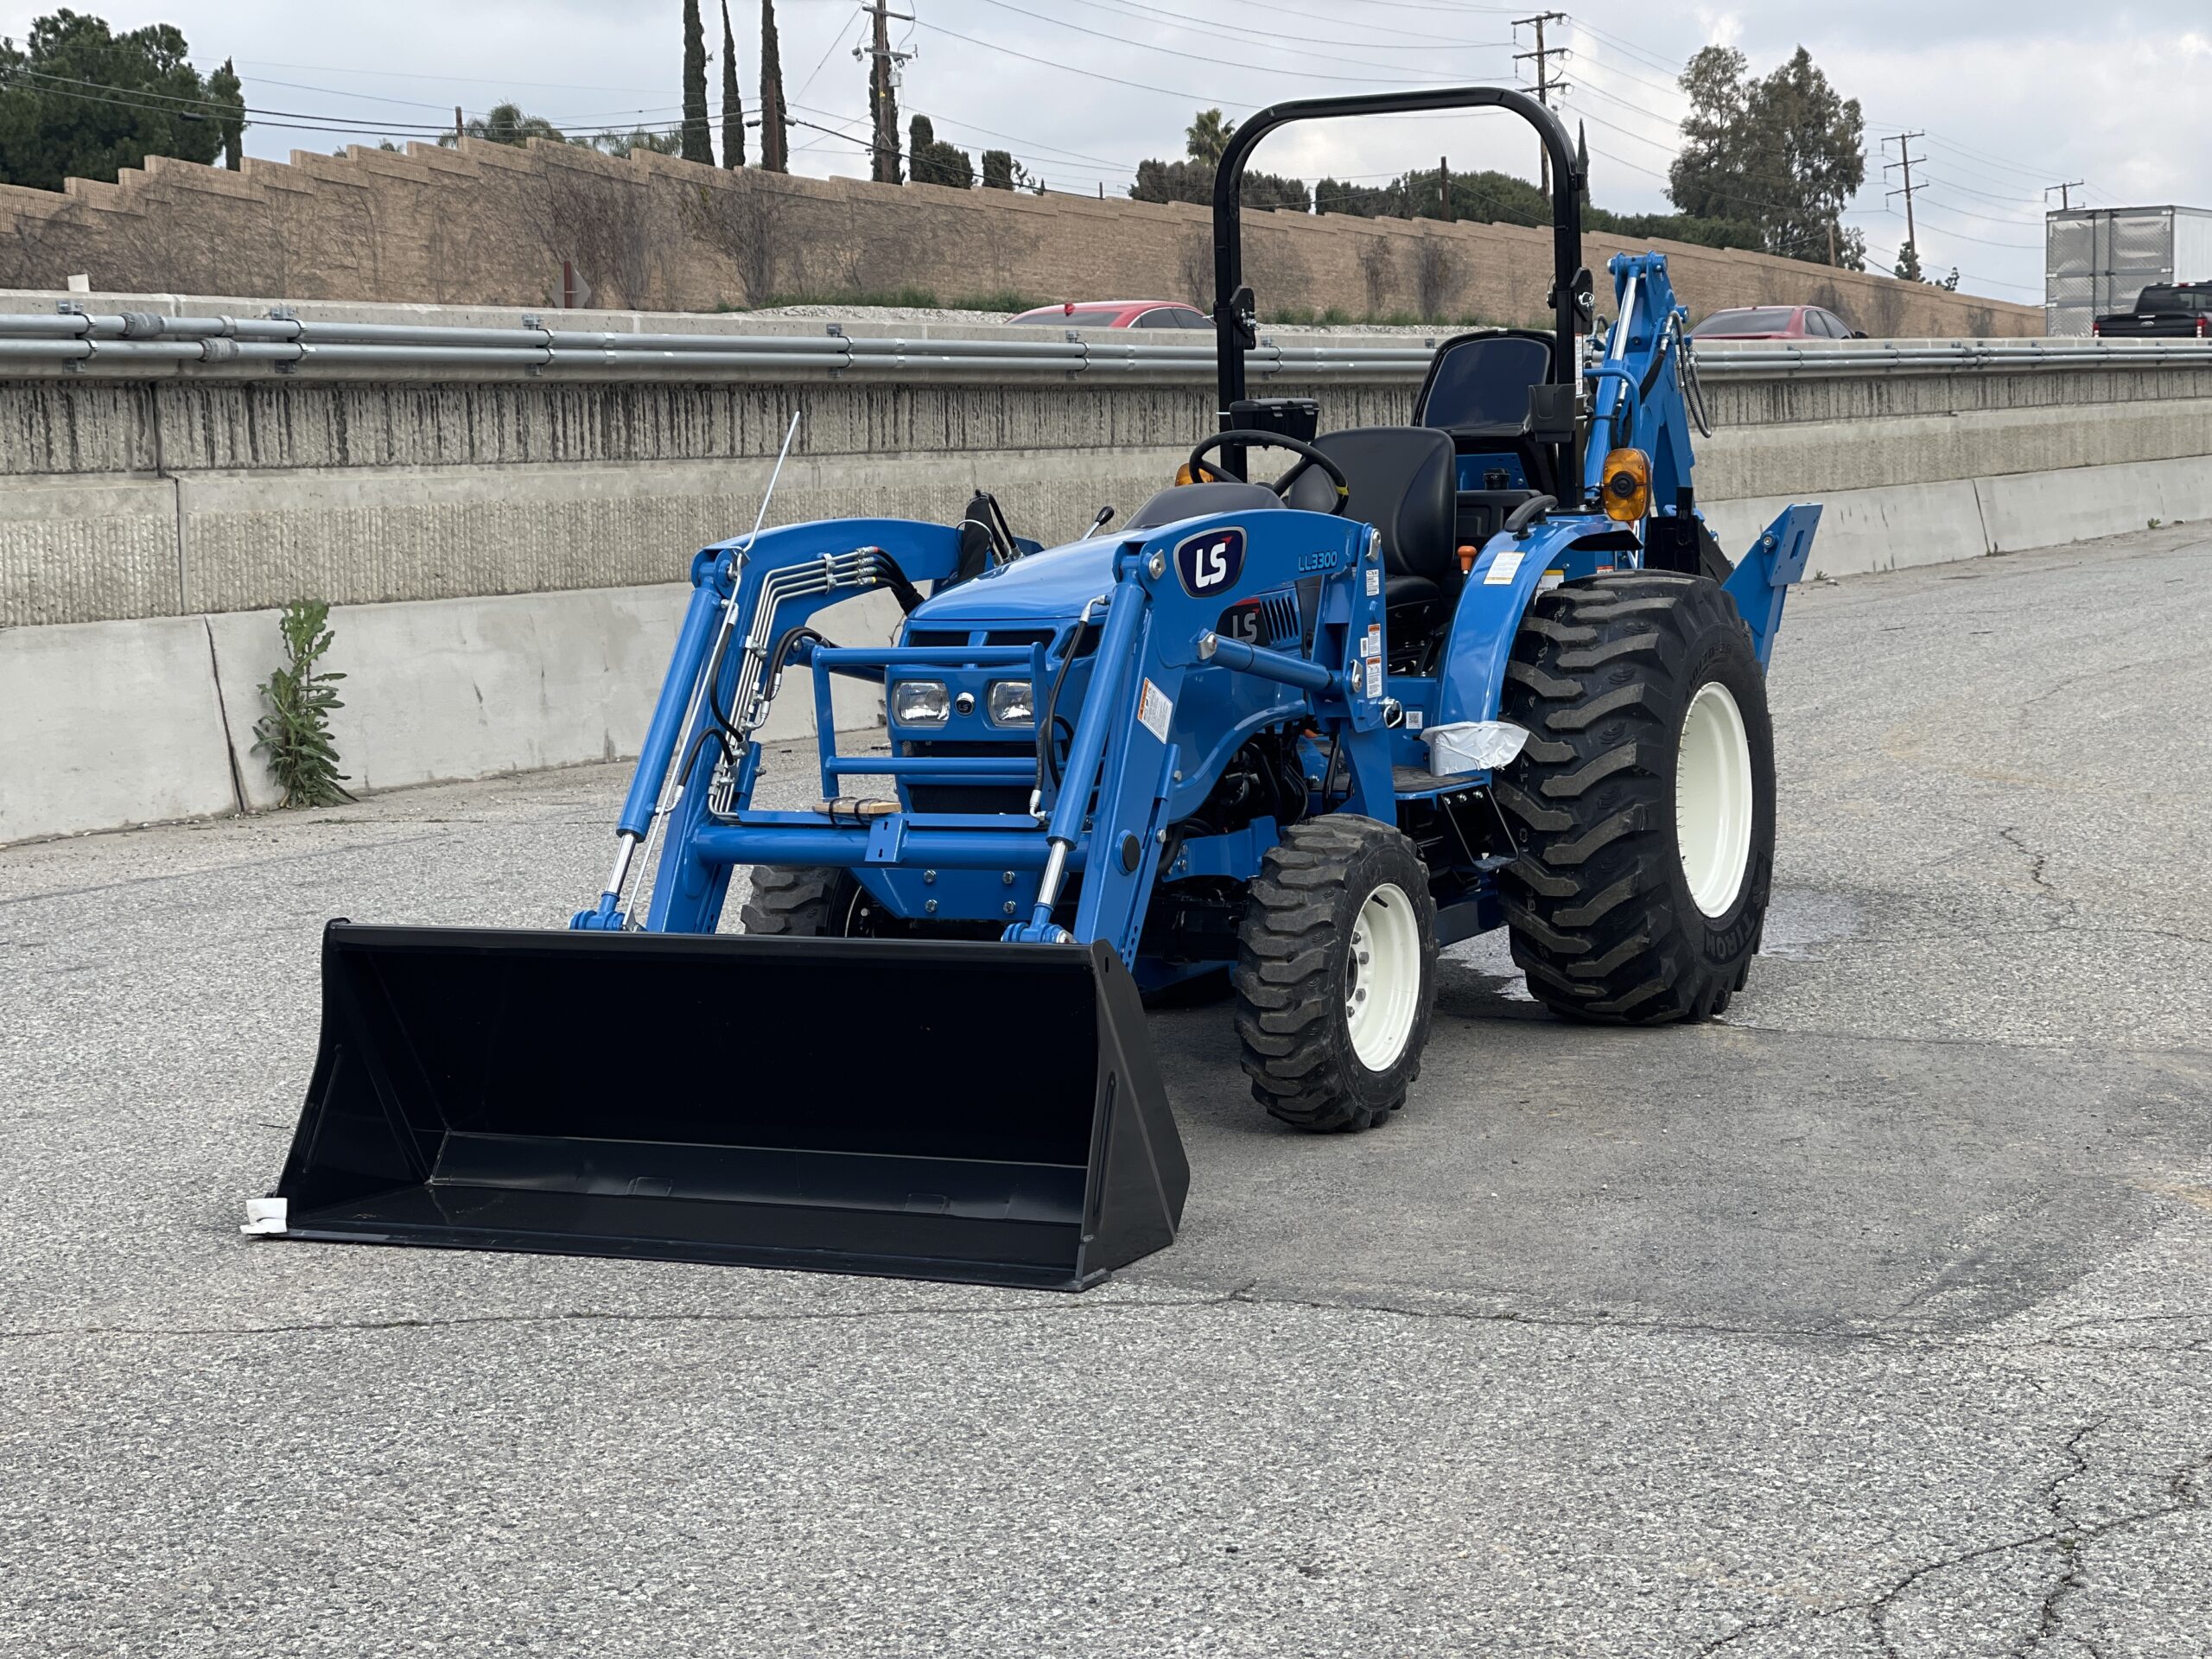 LS MT225HE Compact Tractor with a loader / backhoe